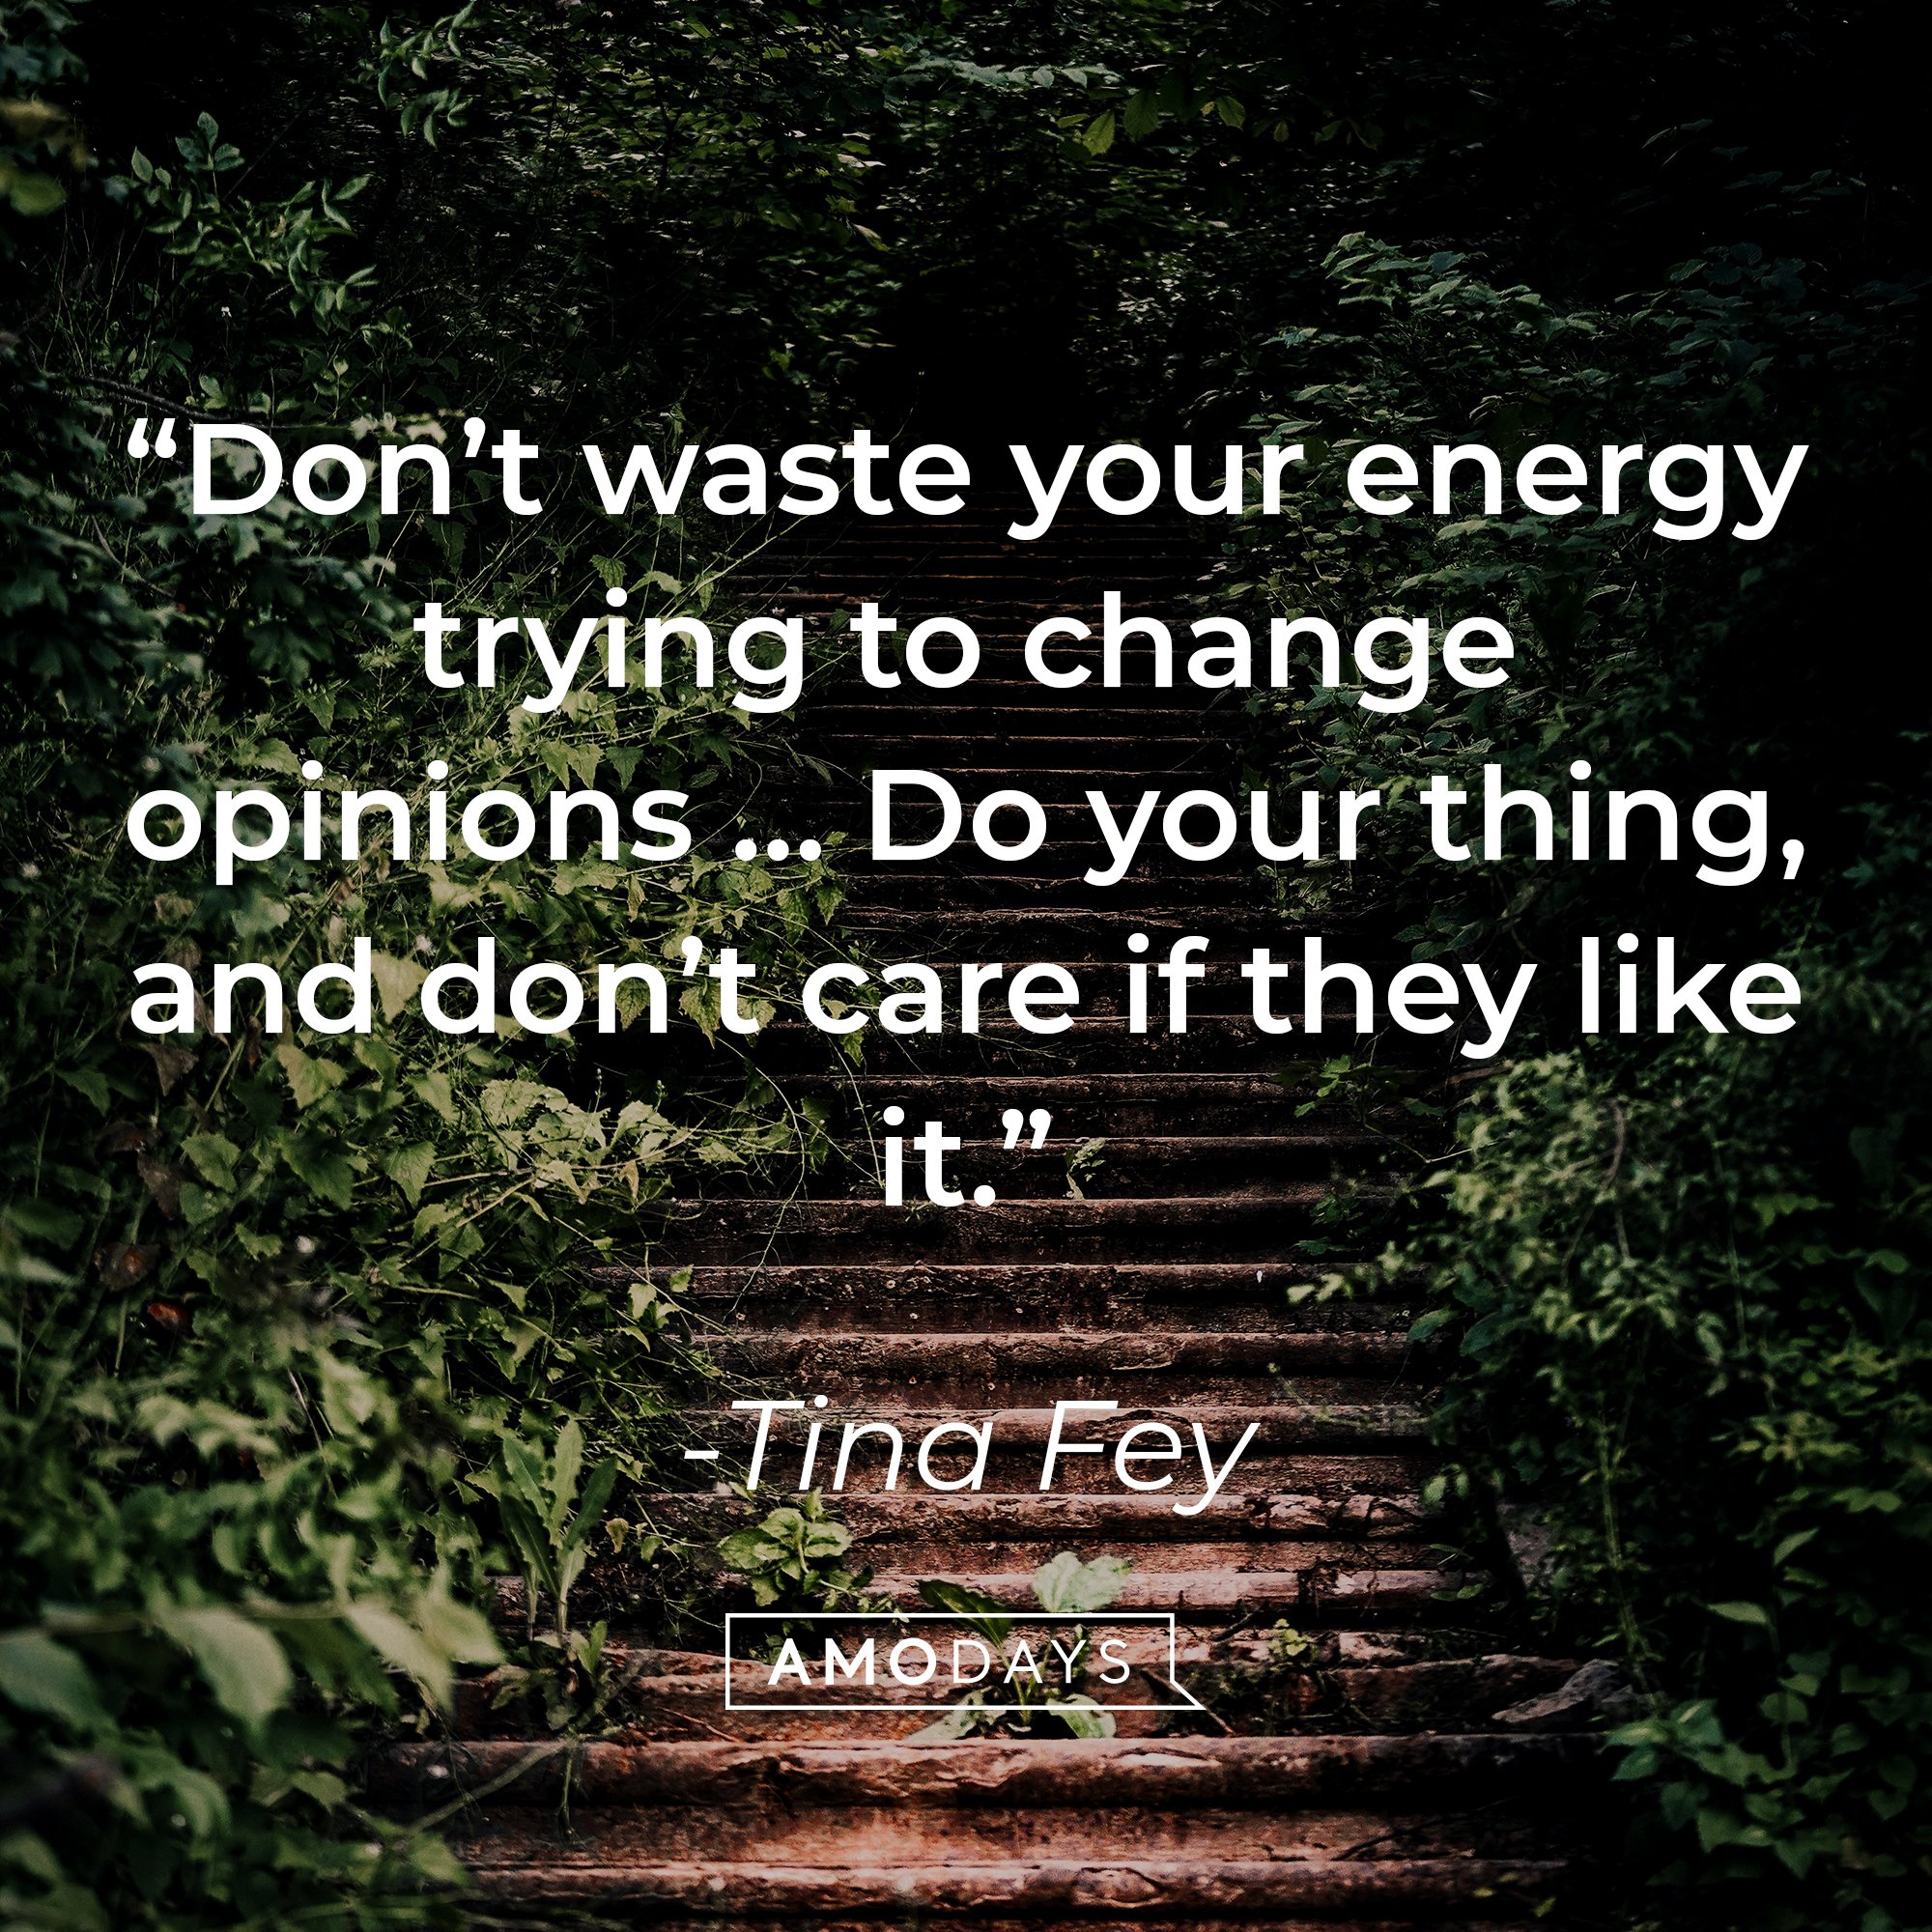  Tina Fey's quote: “Don’t waste your energy trying to change opinions … Do your thing, and don’t care if they like it.” | Image: AmoDays